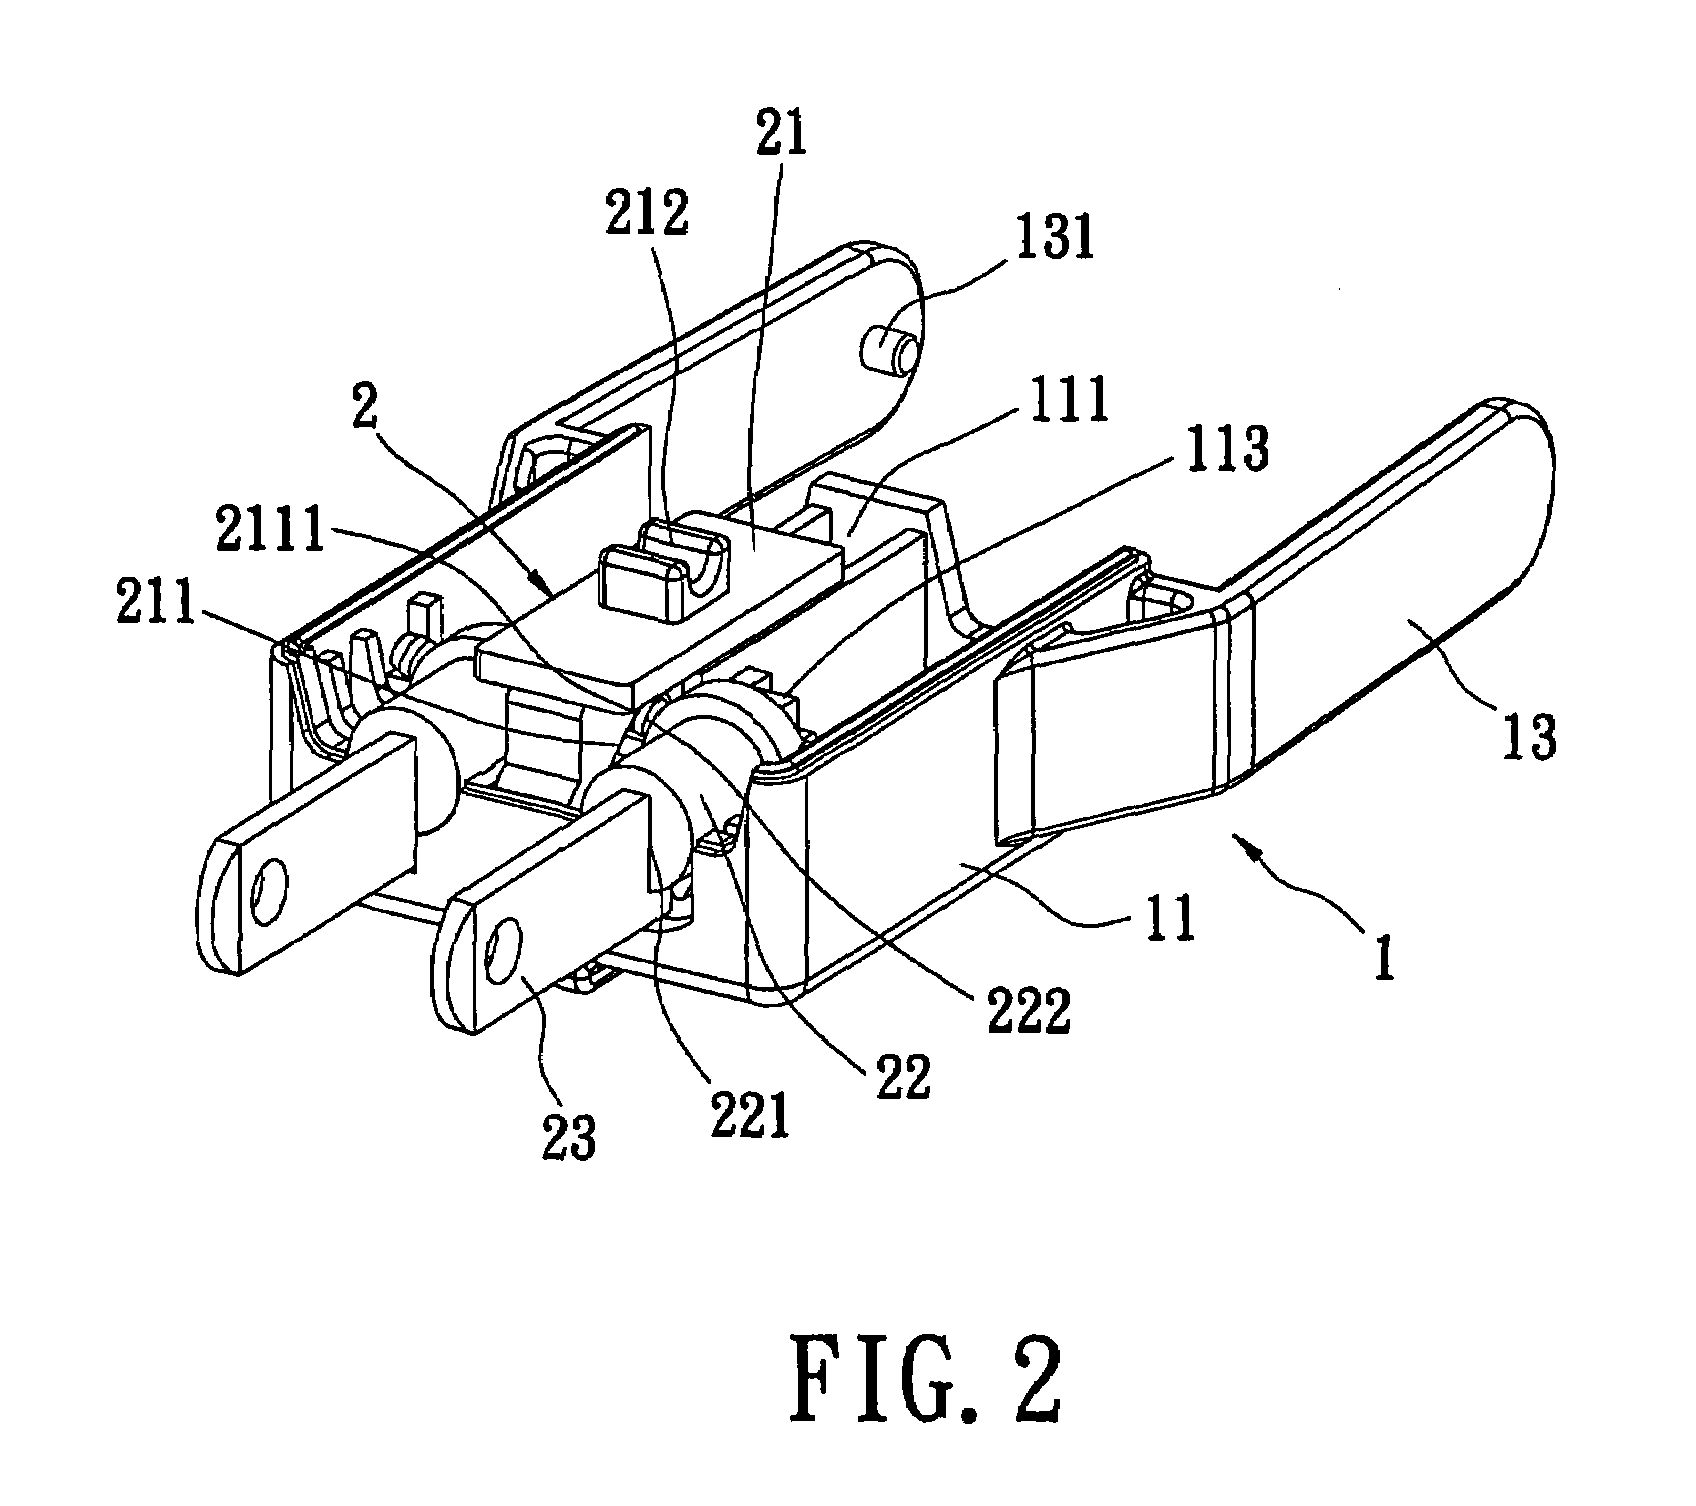 Compound conversion plug structure with adjustable angle and adapter